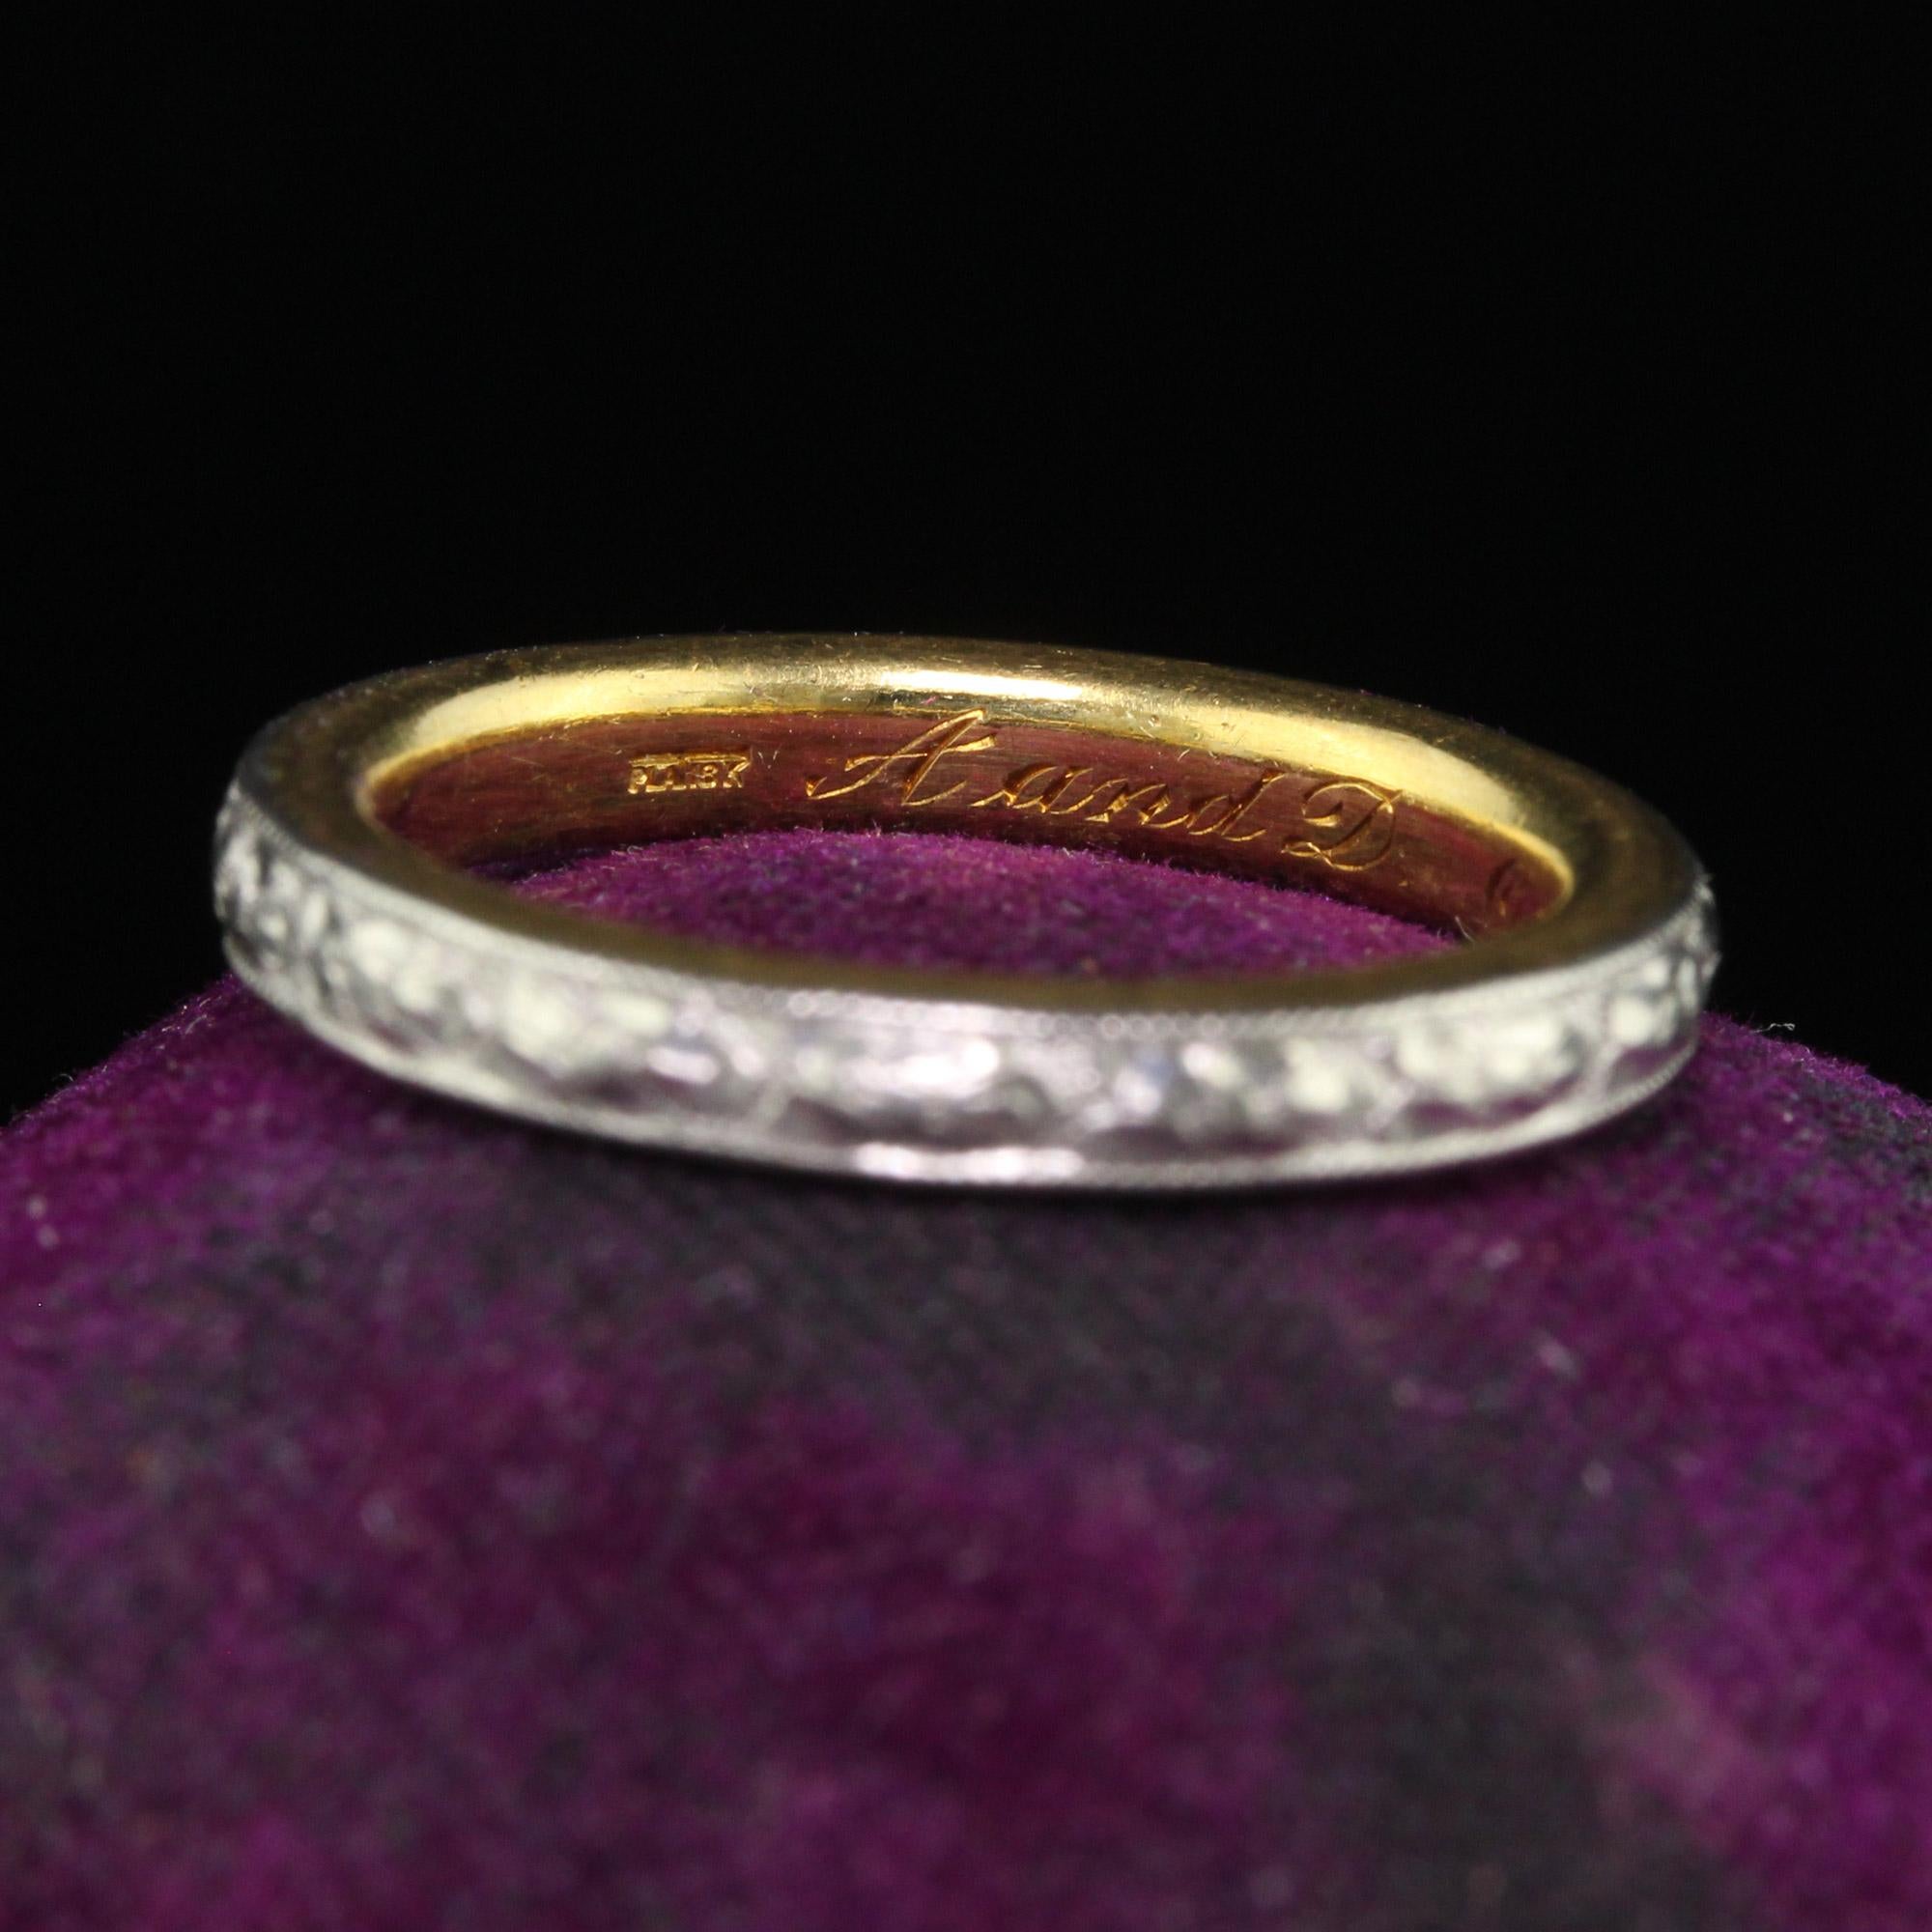 Women's Antique Art Deco Platinum and 18K Gold Engraved Wedding Band Circa 1917 - Size 5 For Sale